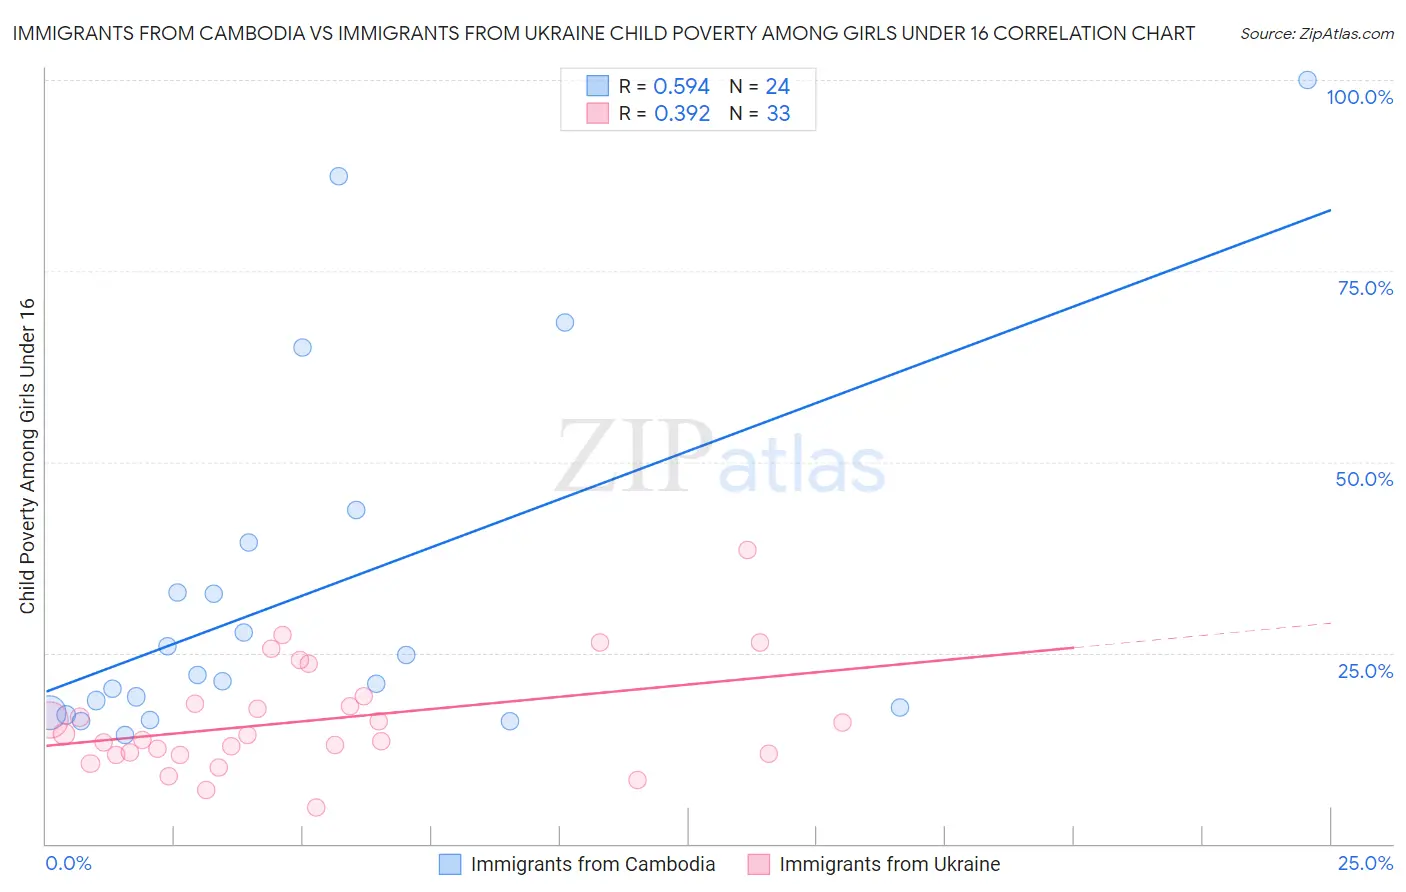 Immigrants from Cambodia vs Immigrants from Ukraine Child Poverty Among Girls Under 16